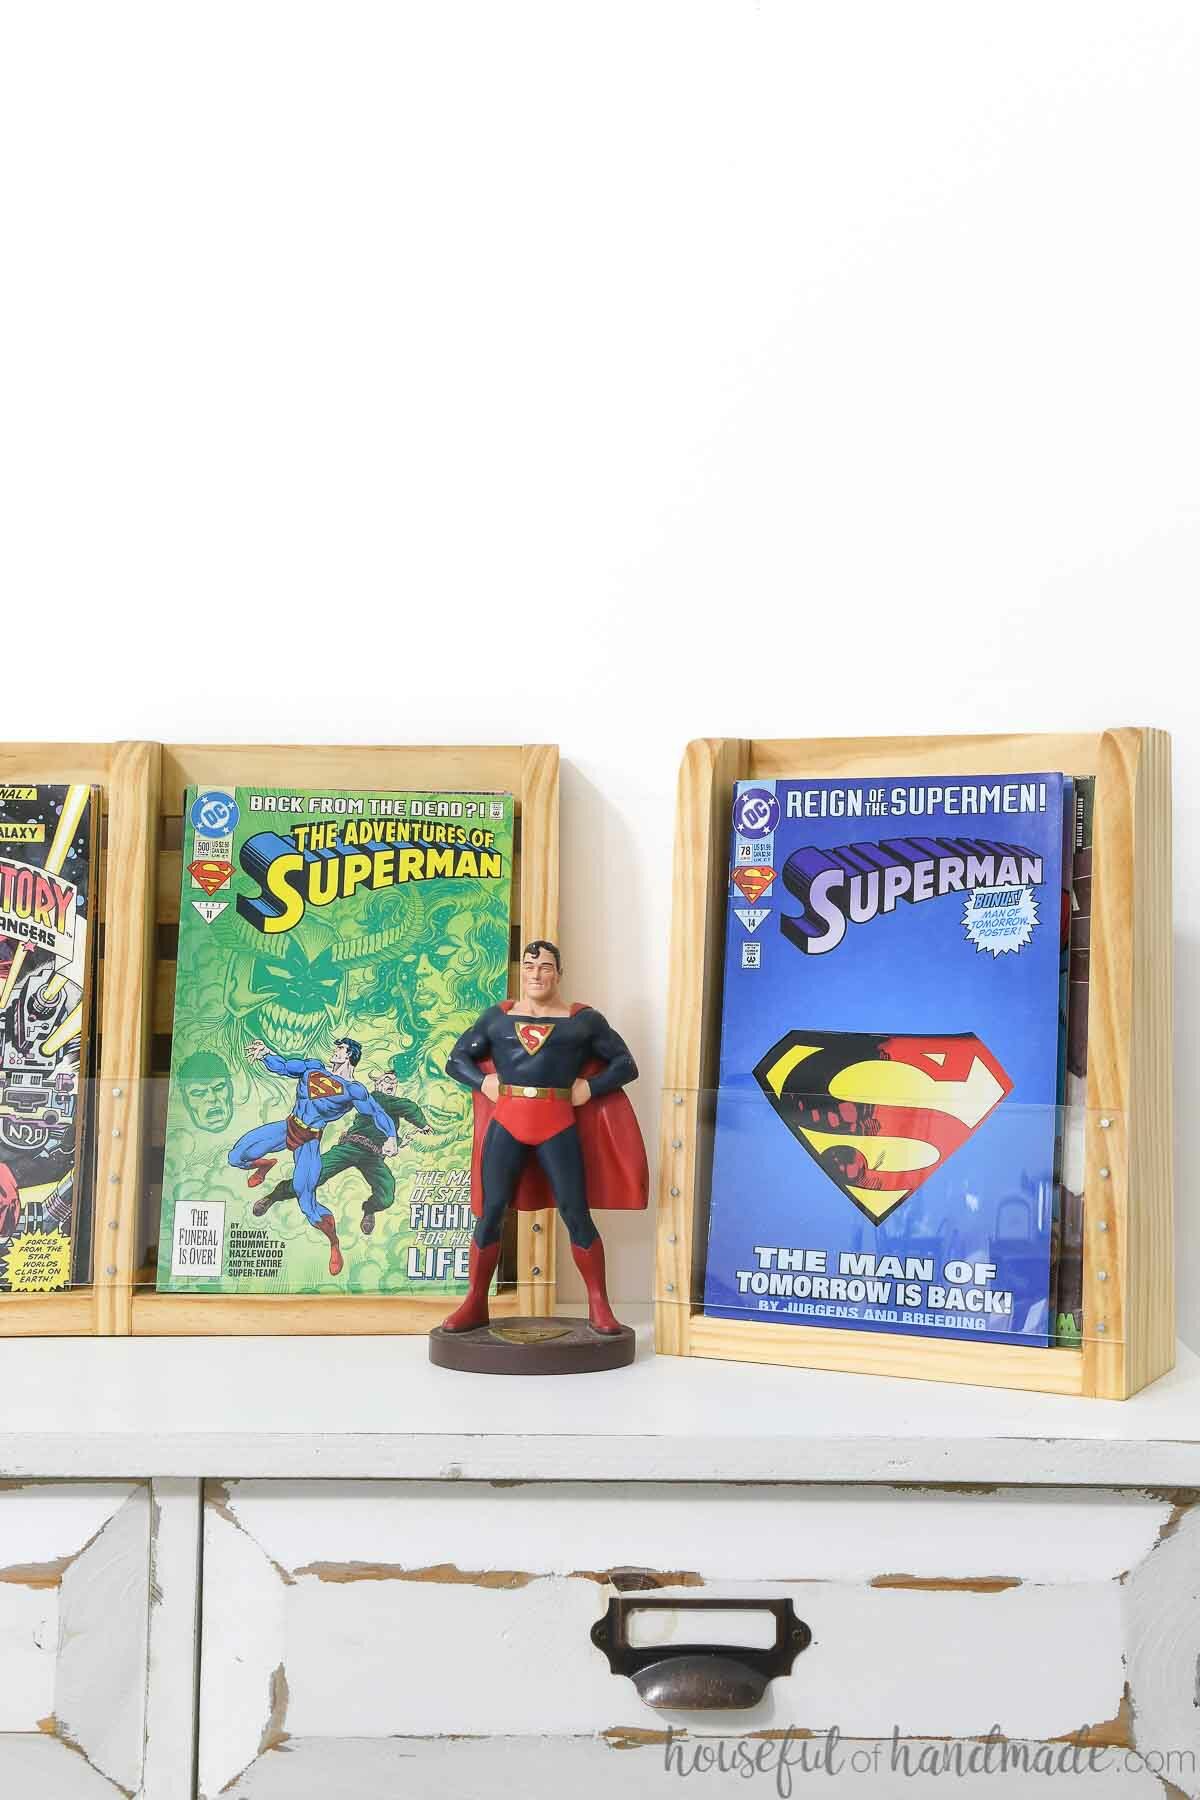 Superman figurine next to the comic book display shelves filled with comic books. 